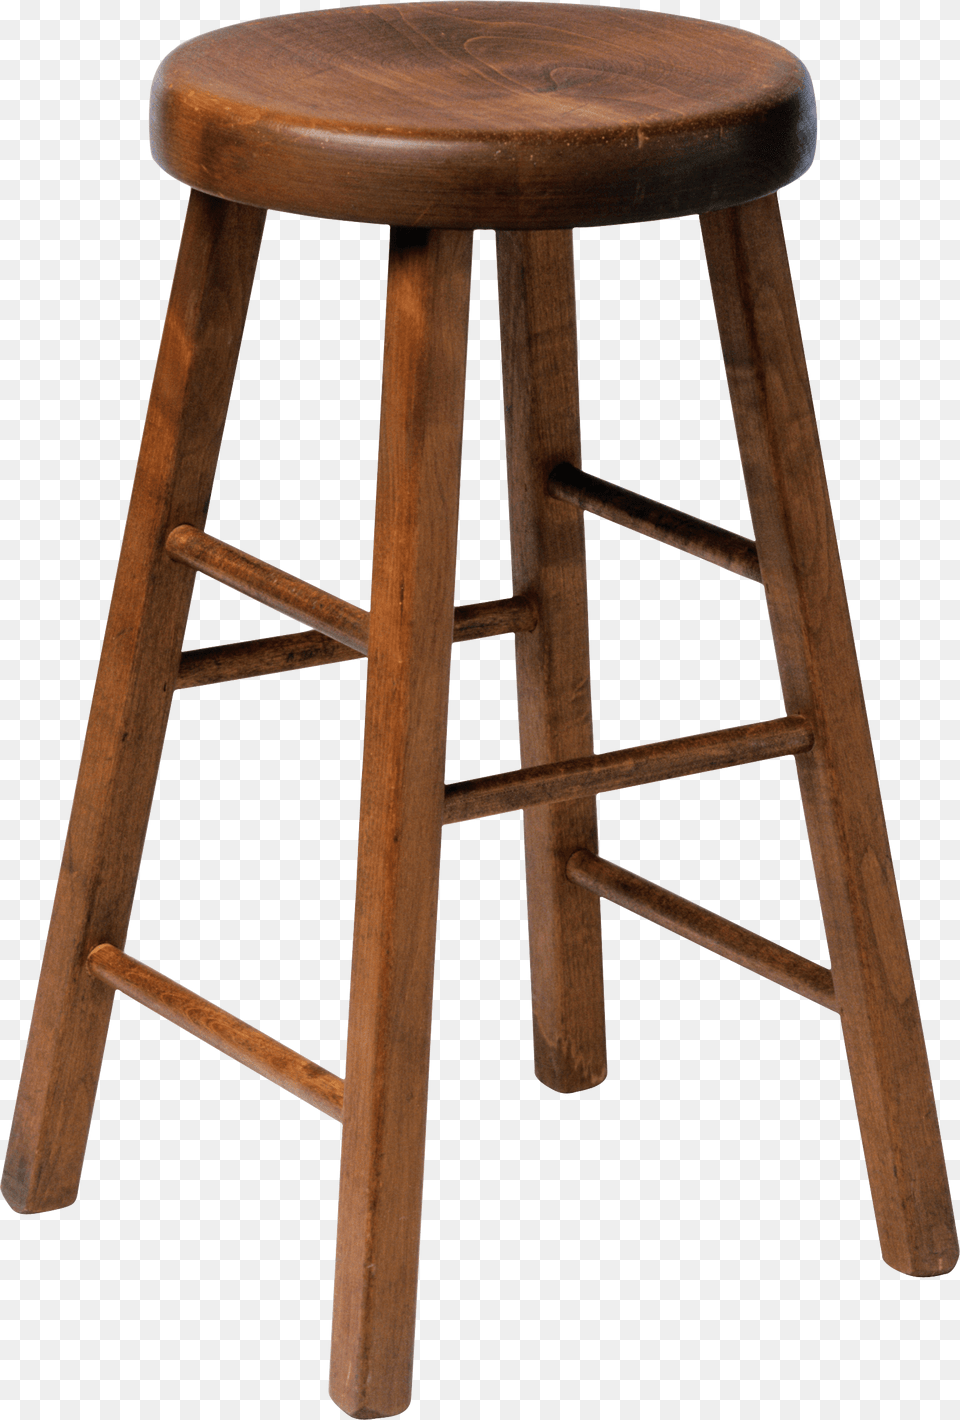 Wooden Stool Chair, Bar Stool, Furniture Free Transparent Png